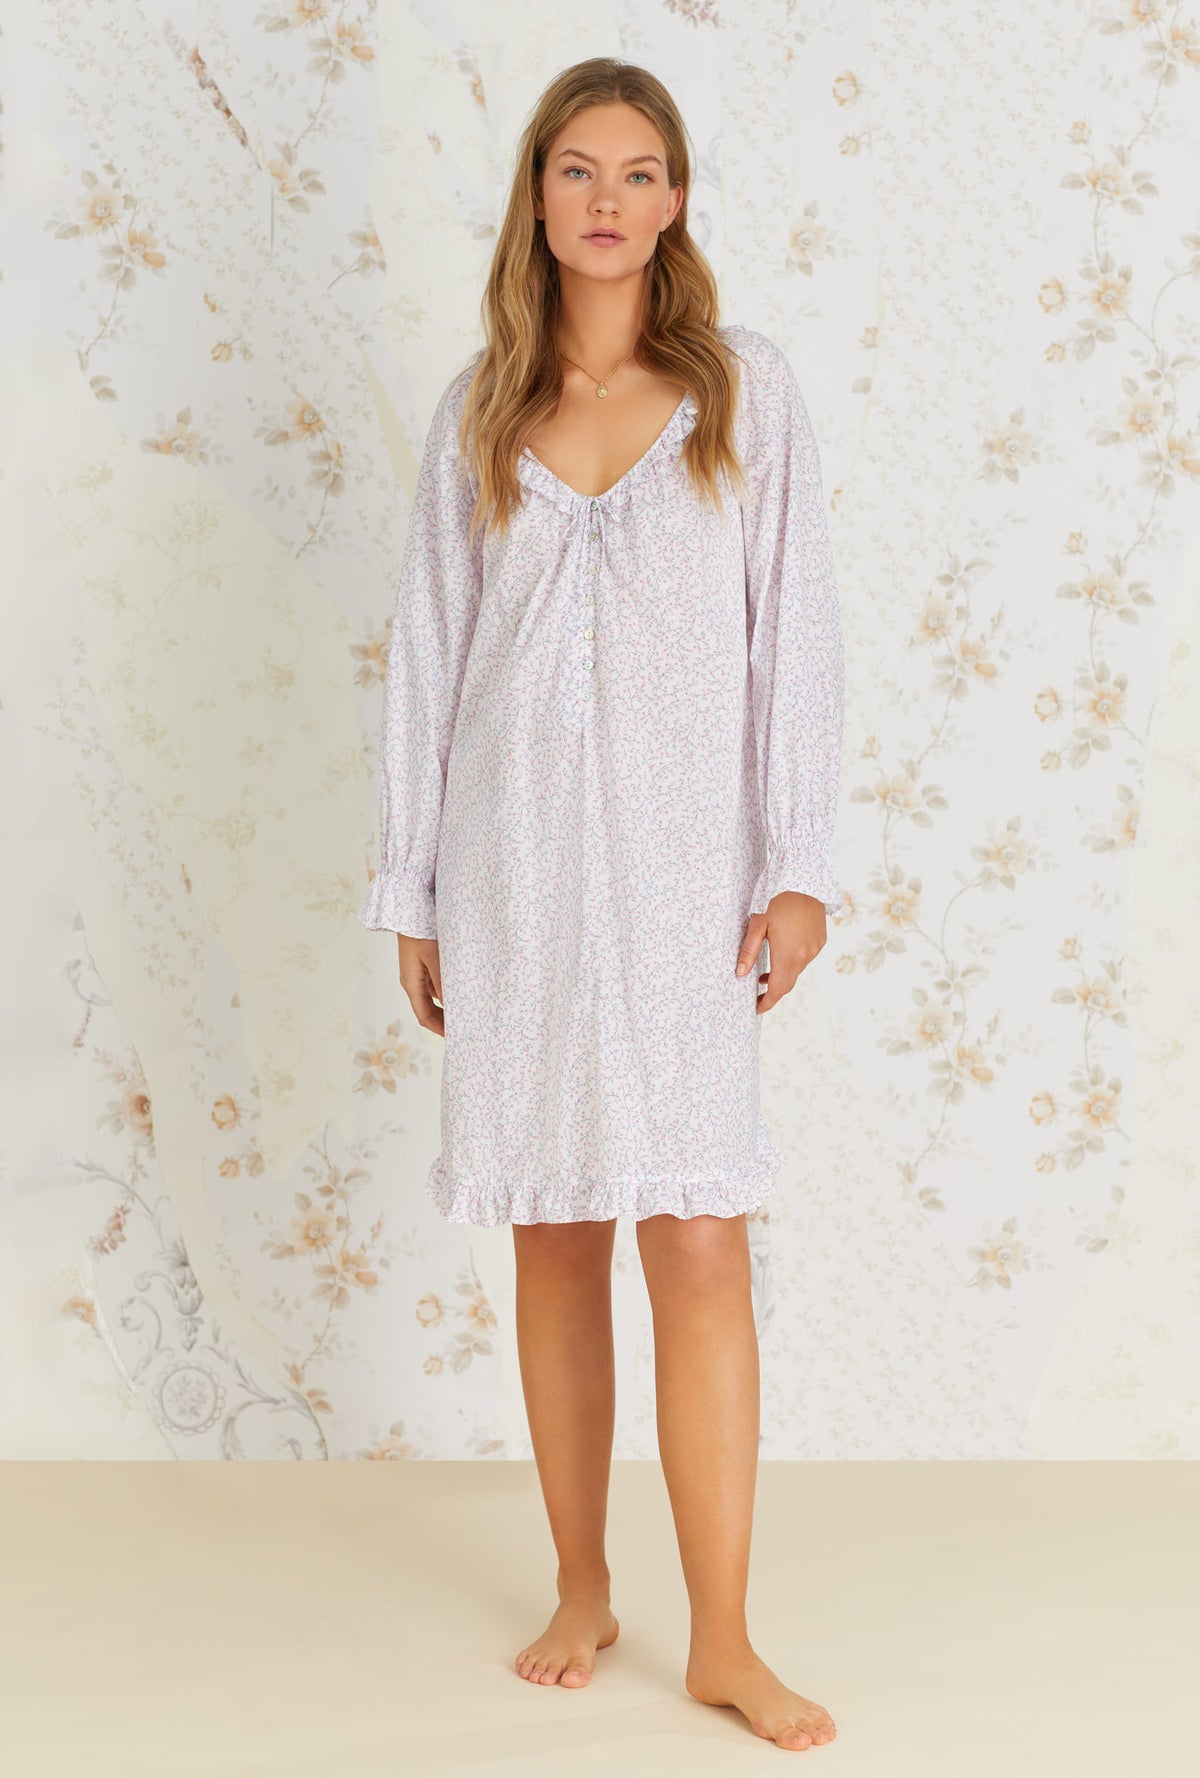 A lady wearing white cotton poet nightshirt with baby rosette print.